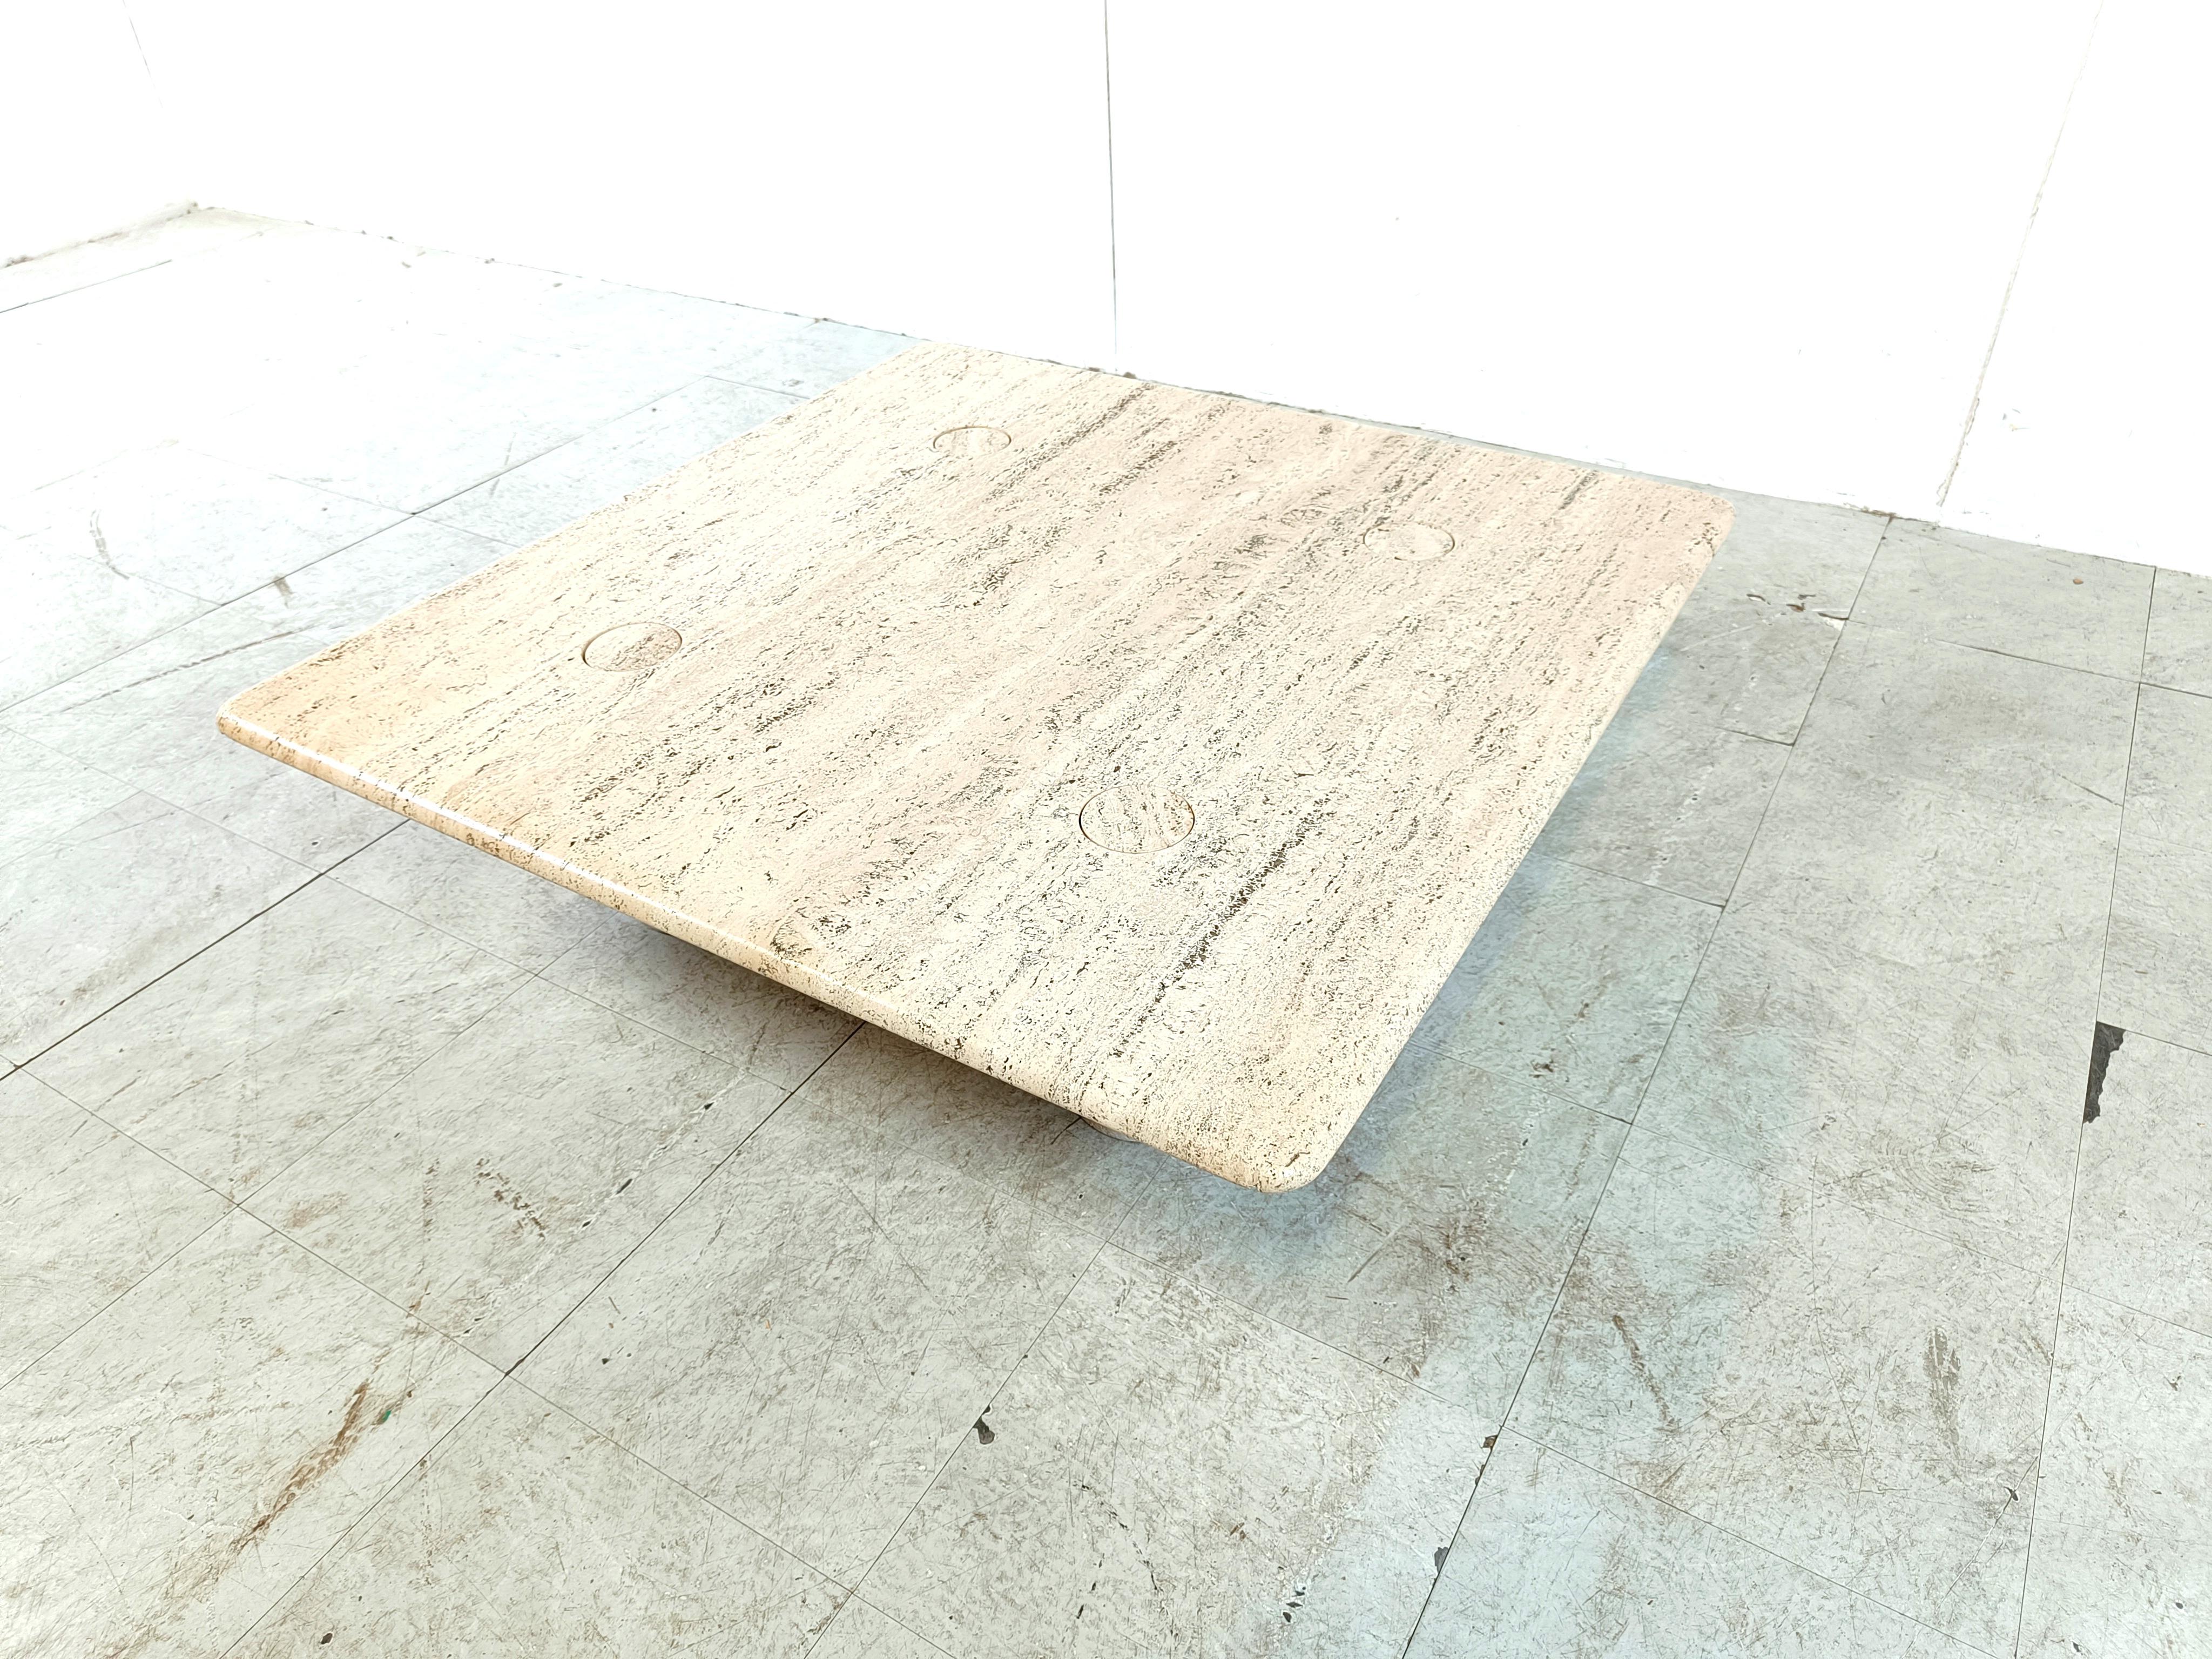 Timeless travertine coffee table with interlocking legs designed by Angelo Mangiarotti for Up&Up.

beautiful porous travertine stone top

Good condition

1970s - Italy

Height: 28cm/11.02